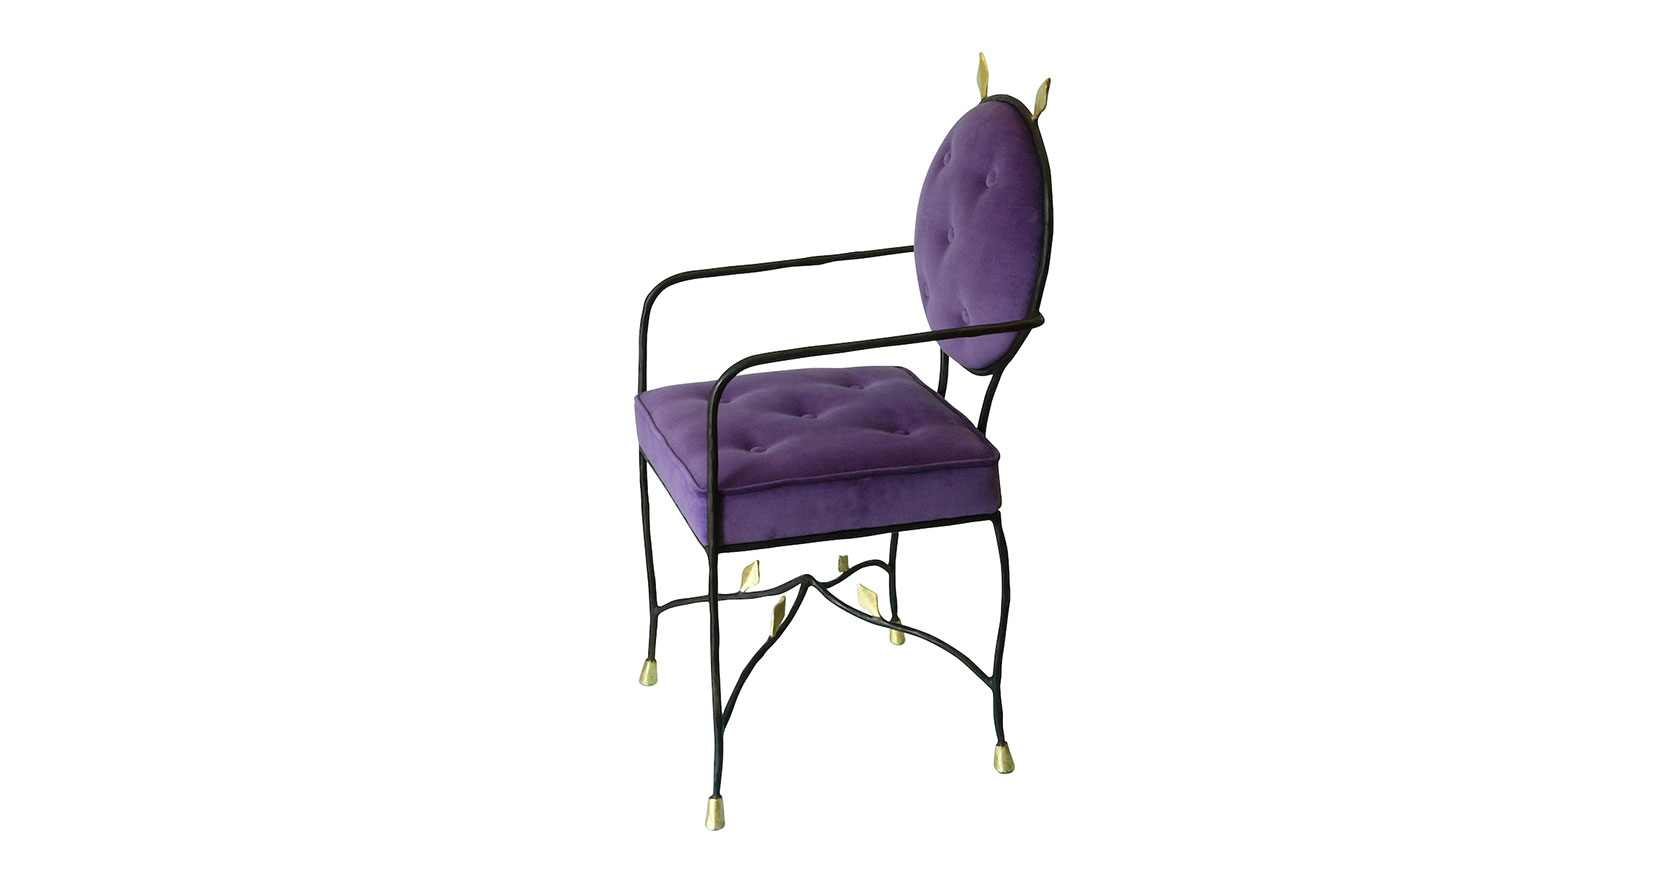 Garouste Bonetti, small baroque armchair in black wrought iron, small golden leaves at the top of the round backrest and under the seat, backrest and seat in purple padded velvet